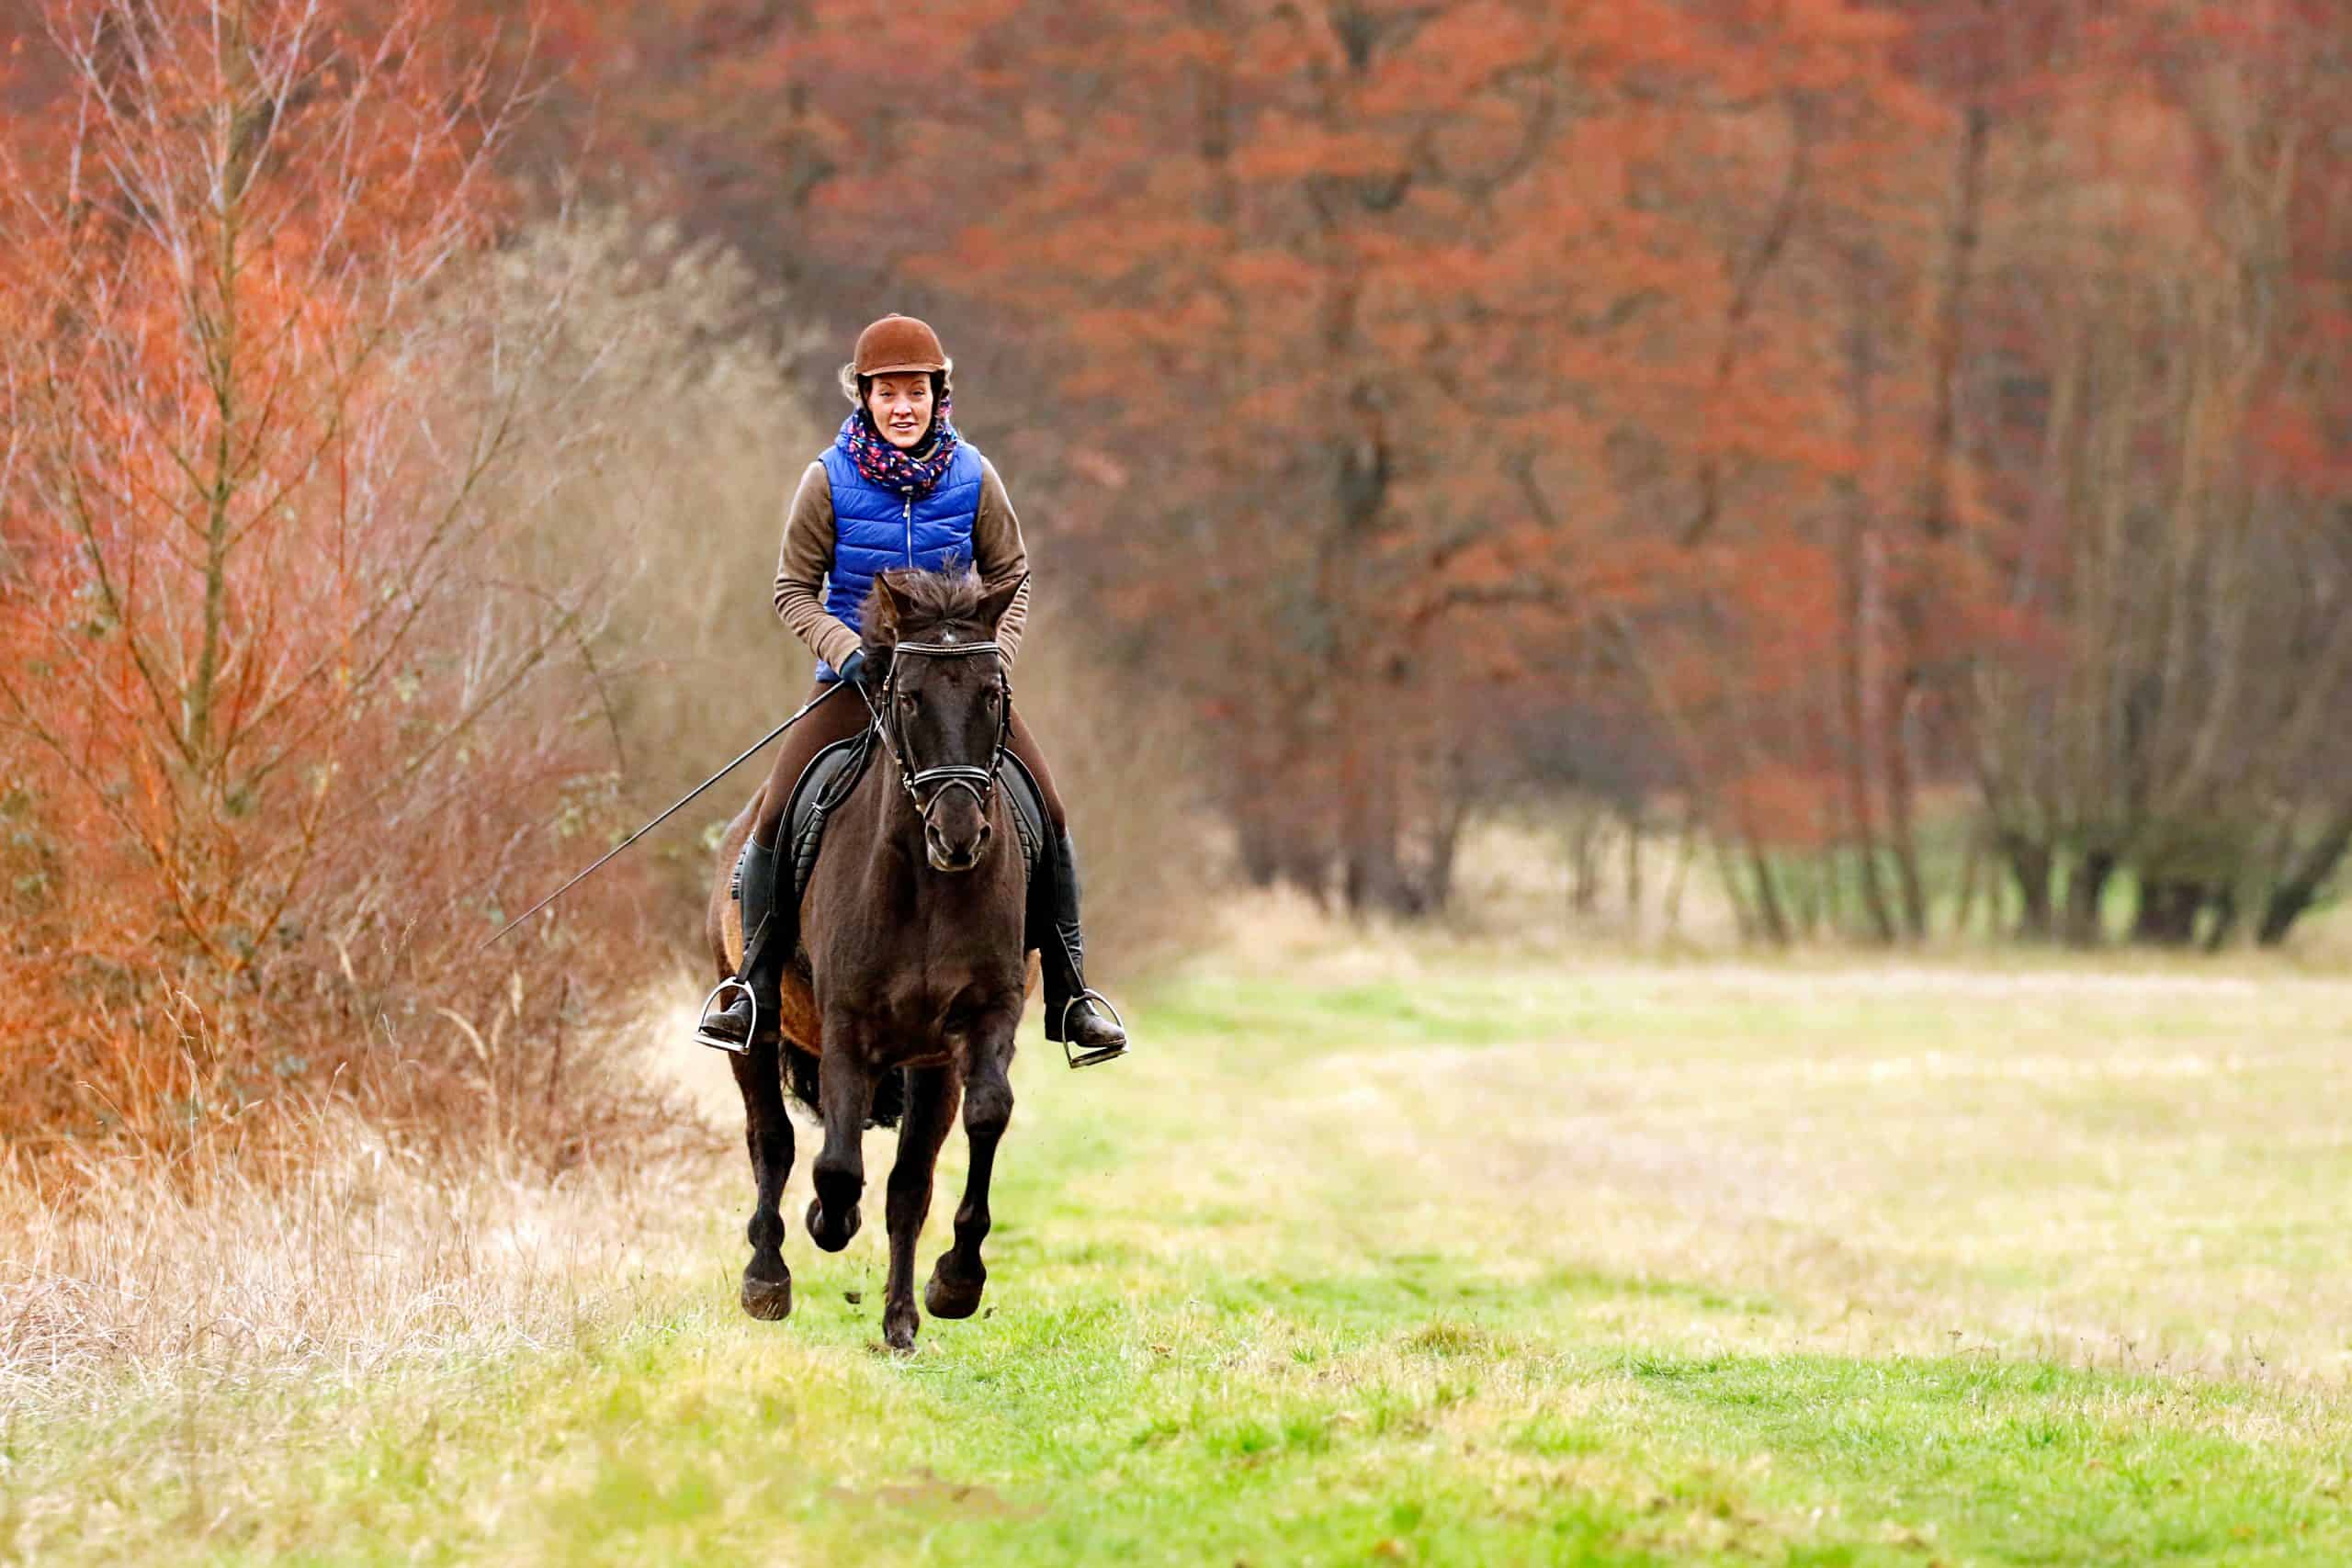 People horse riding girl woman jockey fields forests cantering galloping equestrian